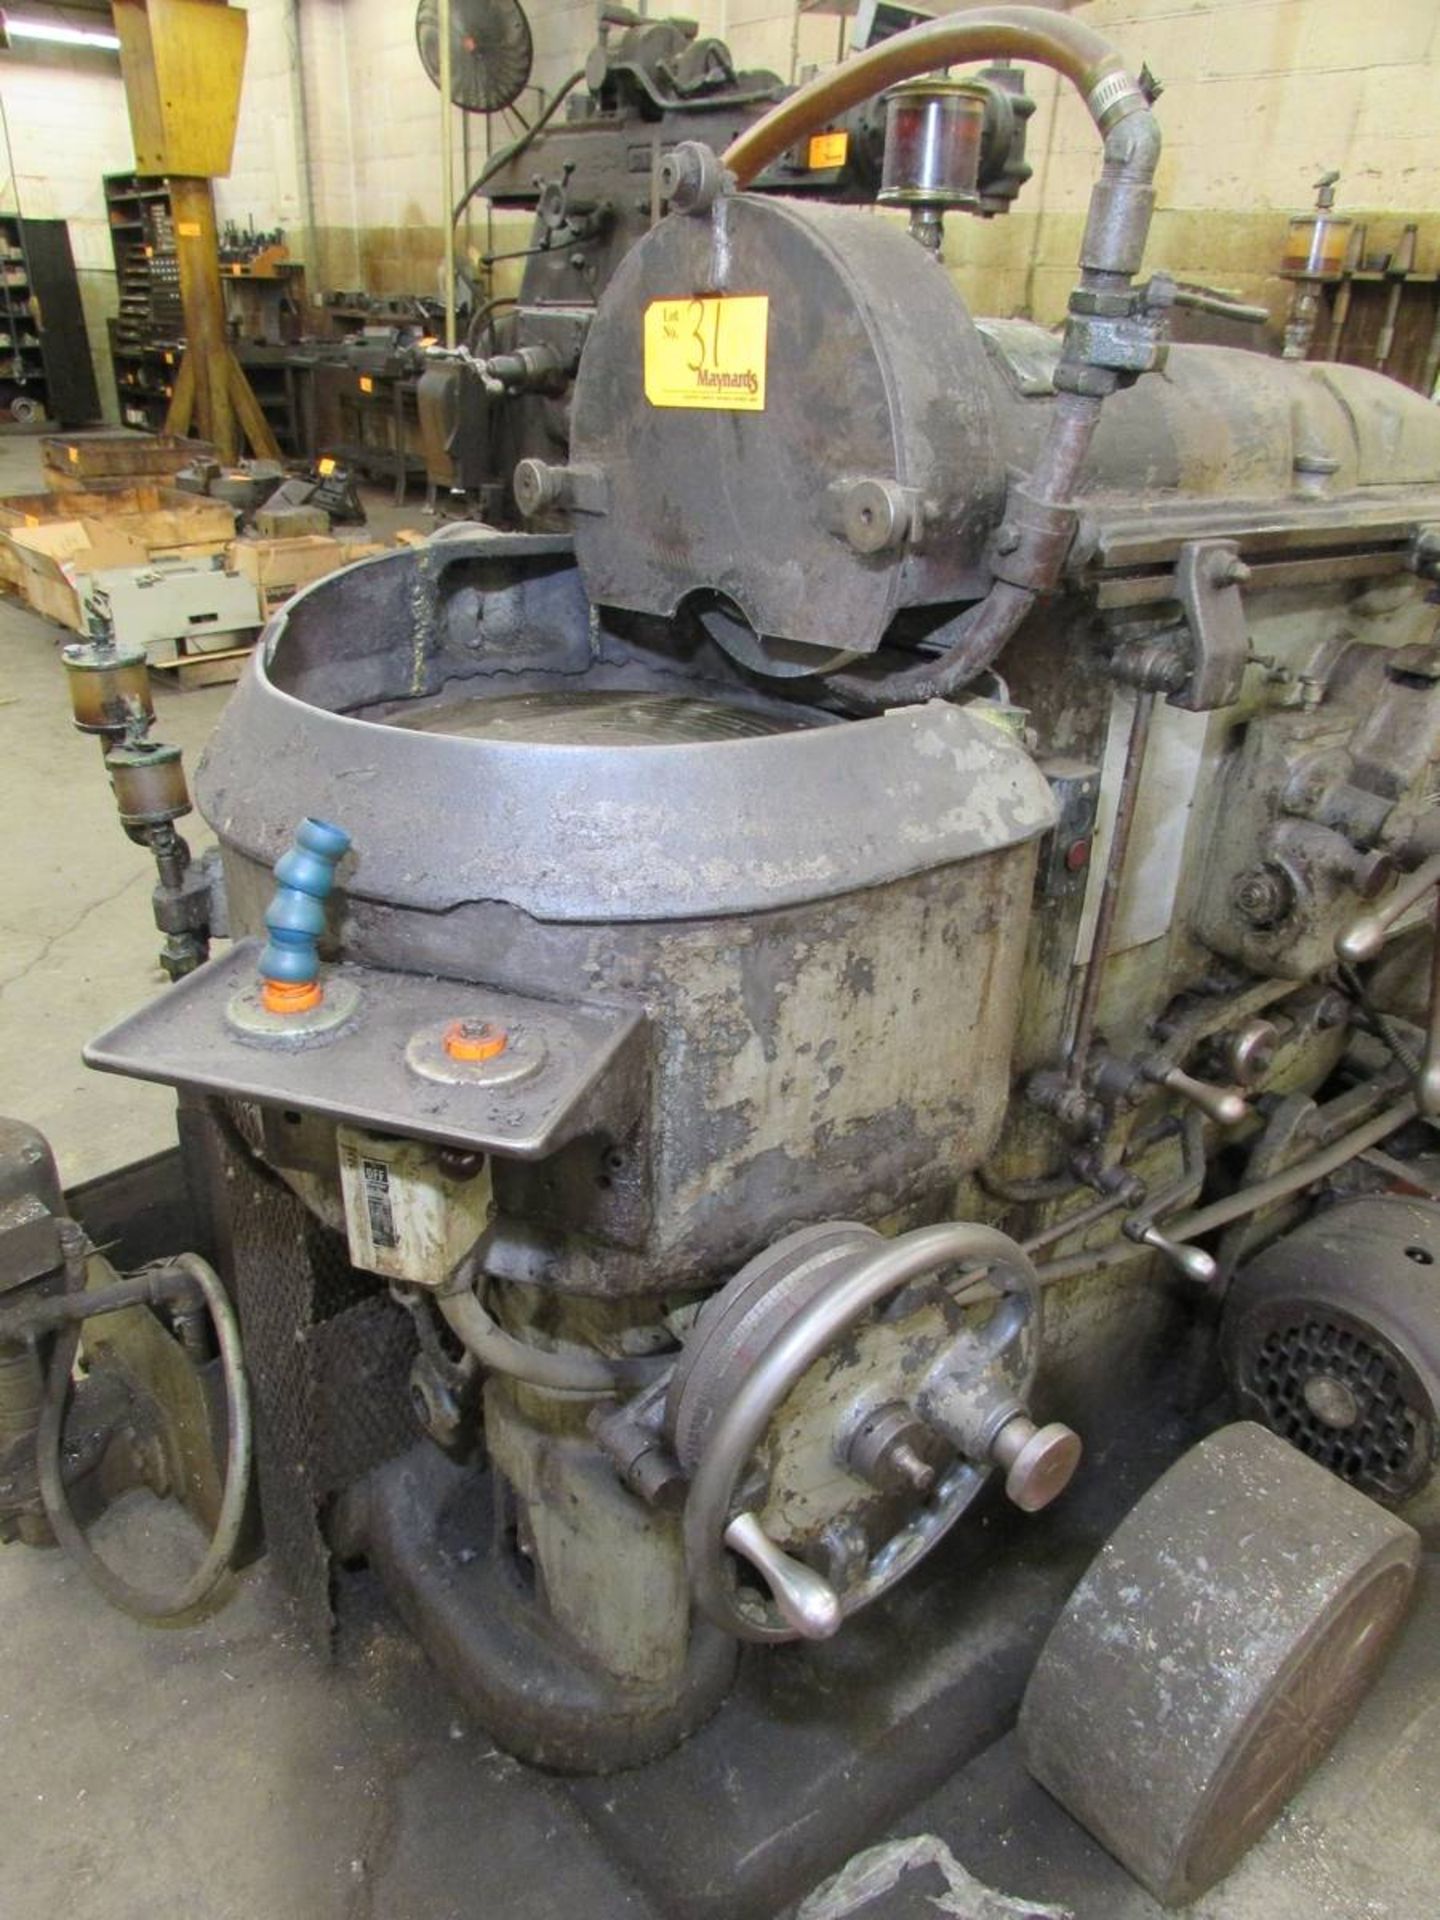 Heald Machine Co No. 22 12" Rotary Surface Grinder - Image 7 of 8